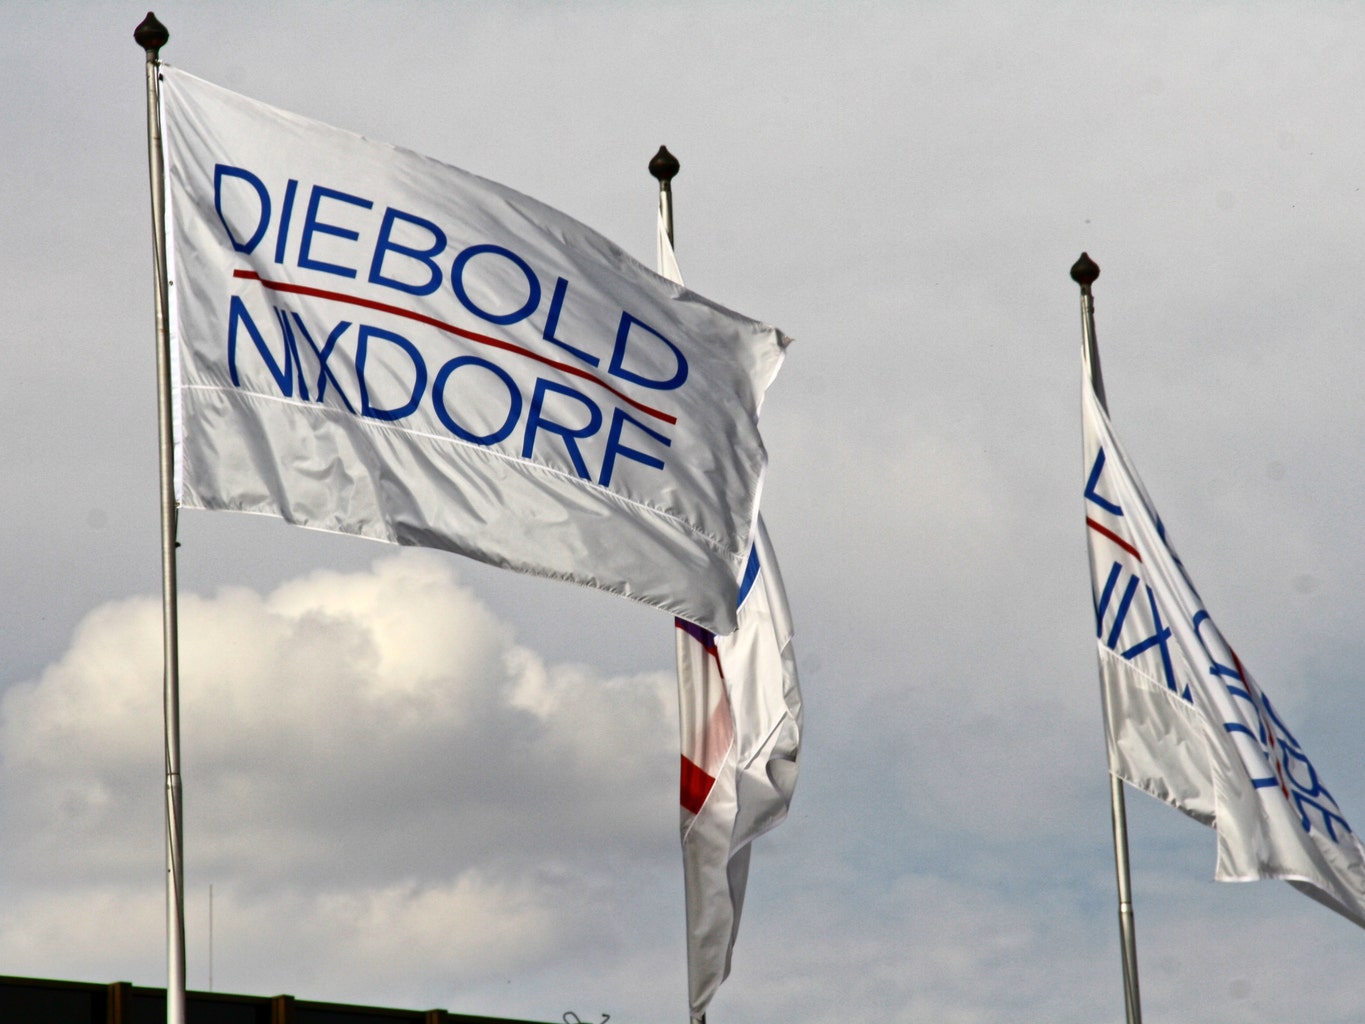 Fidelity Bank to replace ATMs with Diebold Nixdorf's line